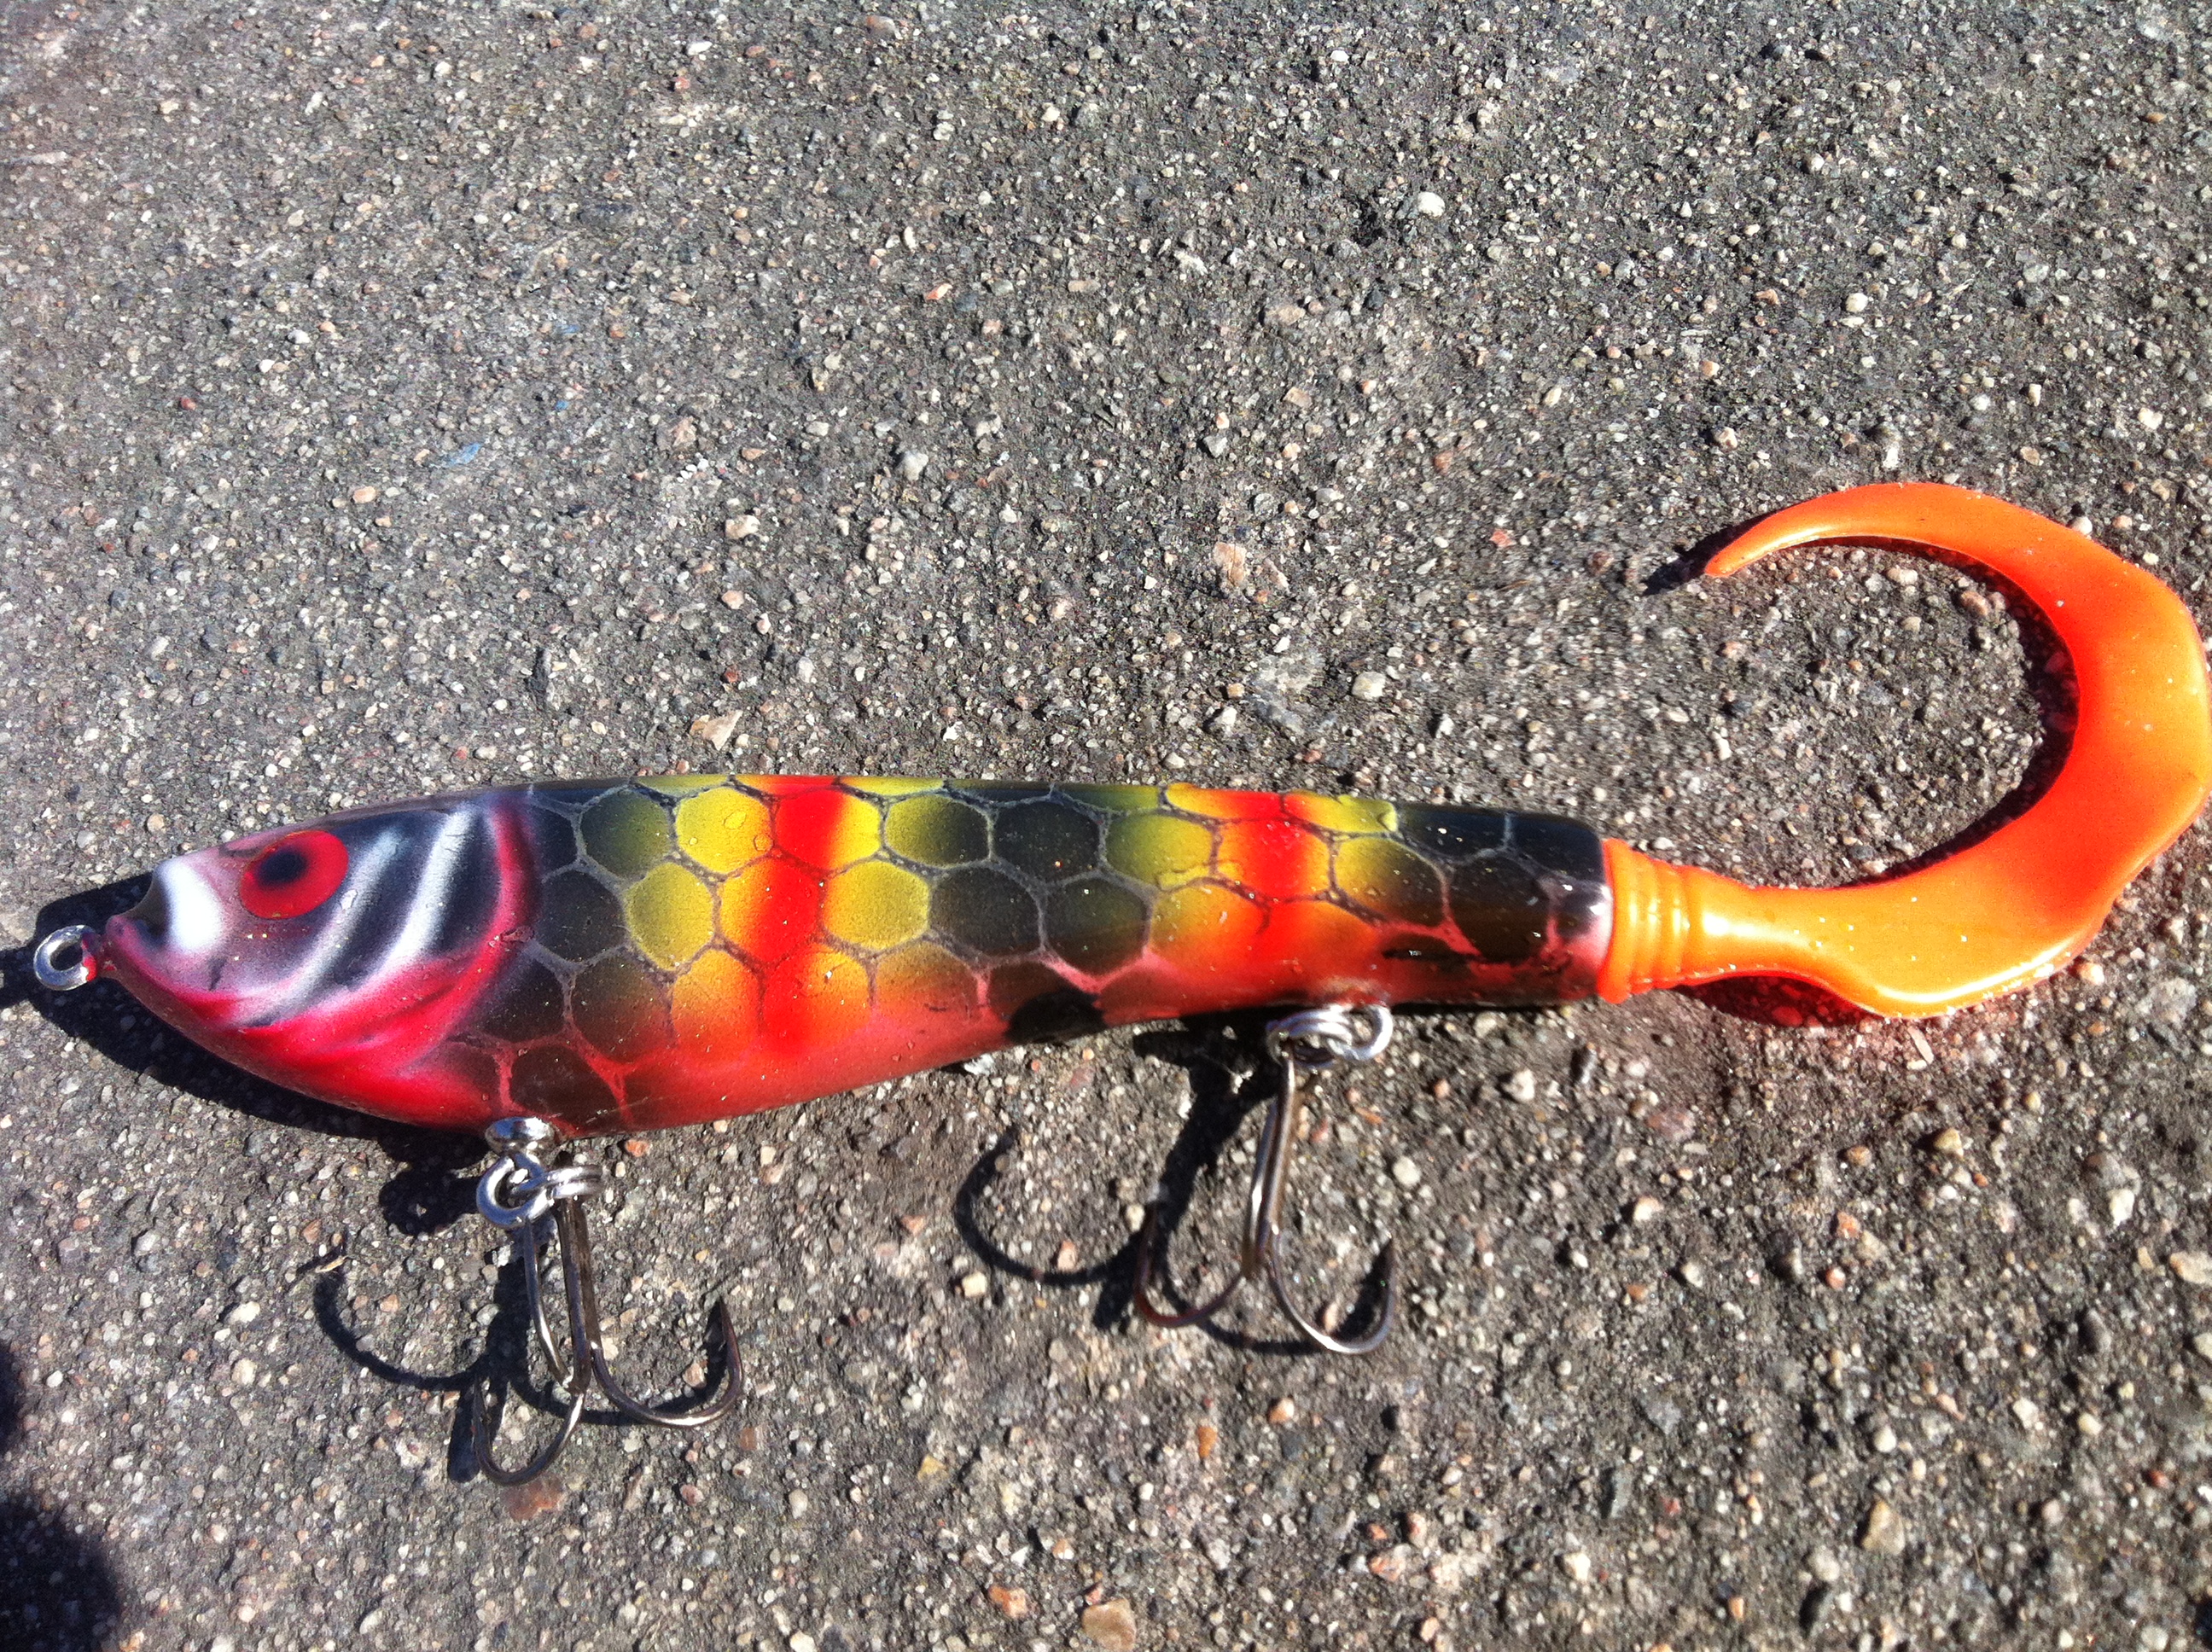 Grams Doggy tail - Coral Snake